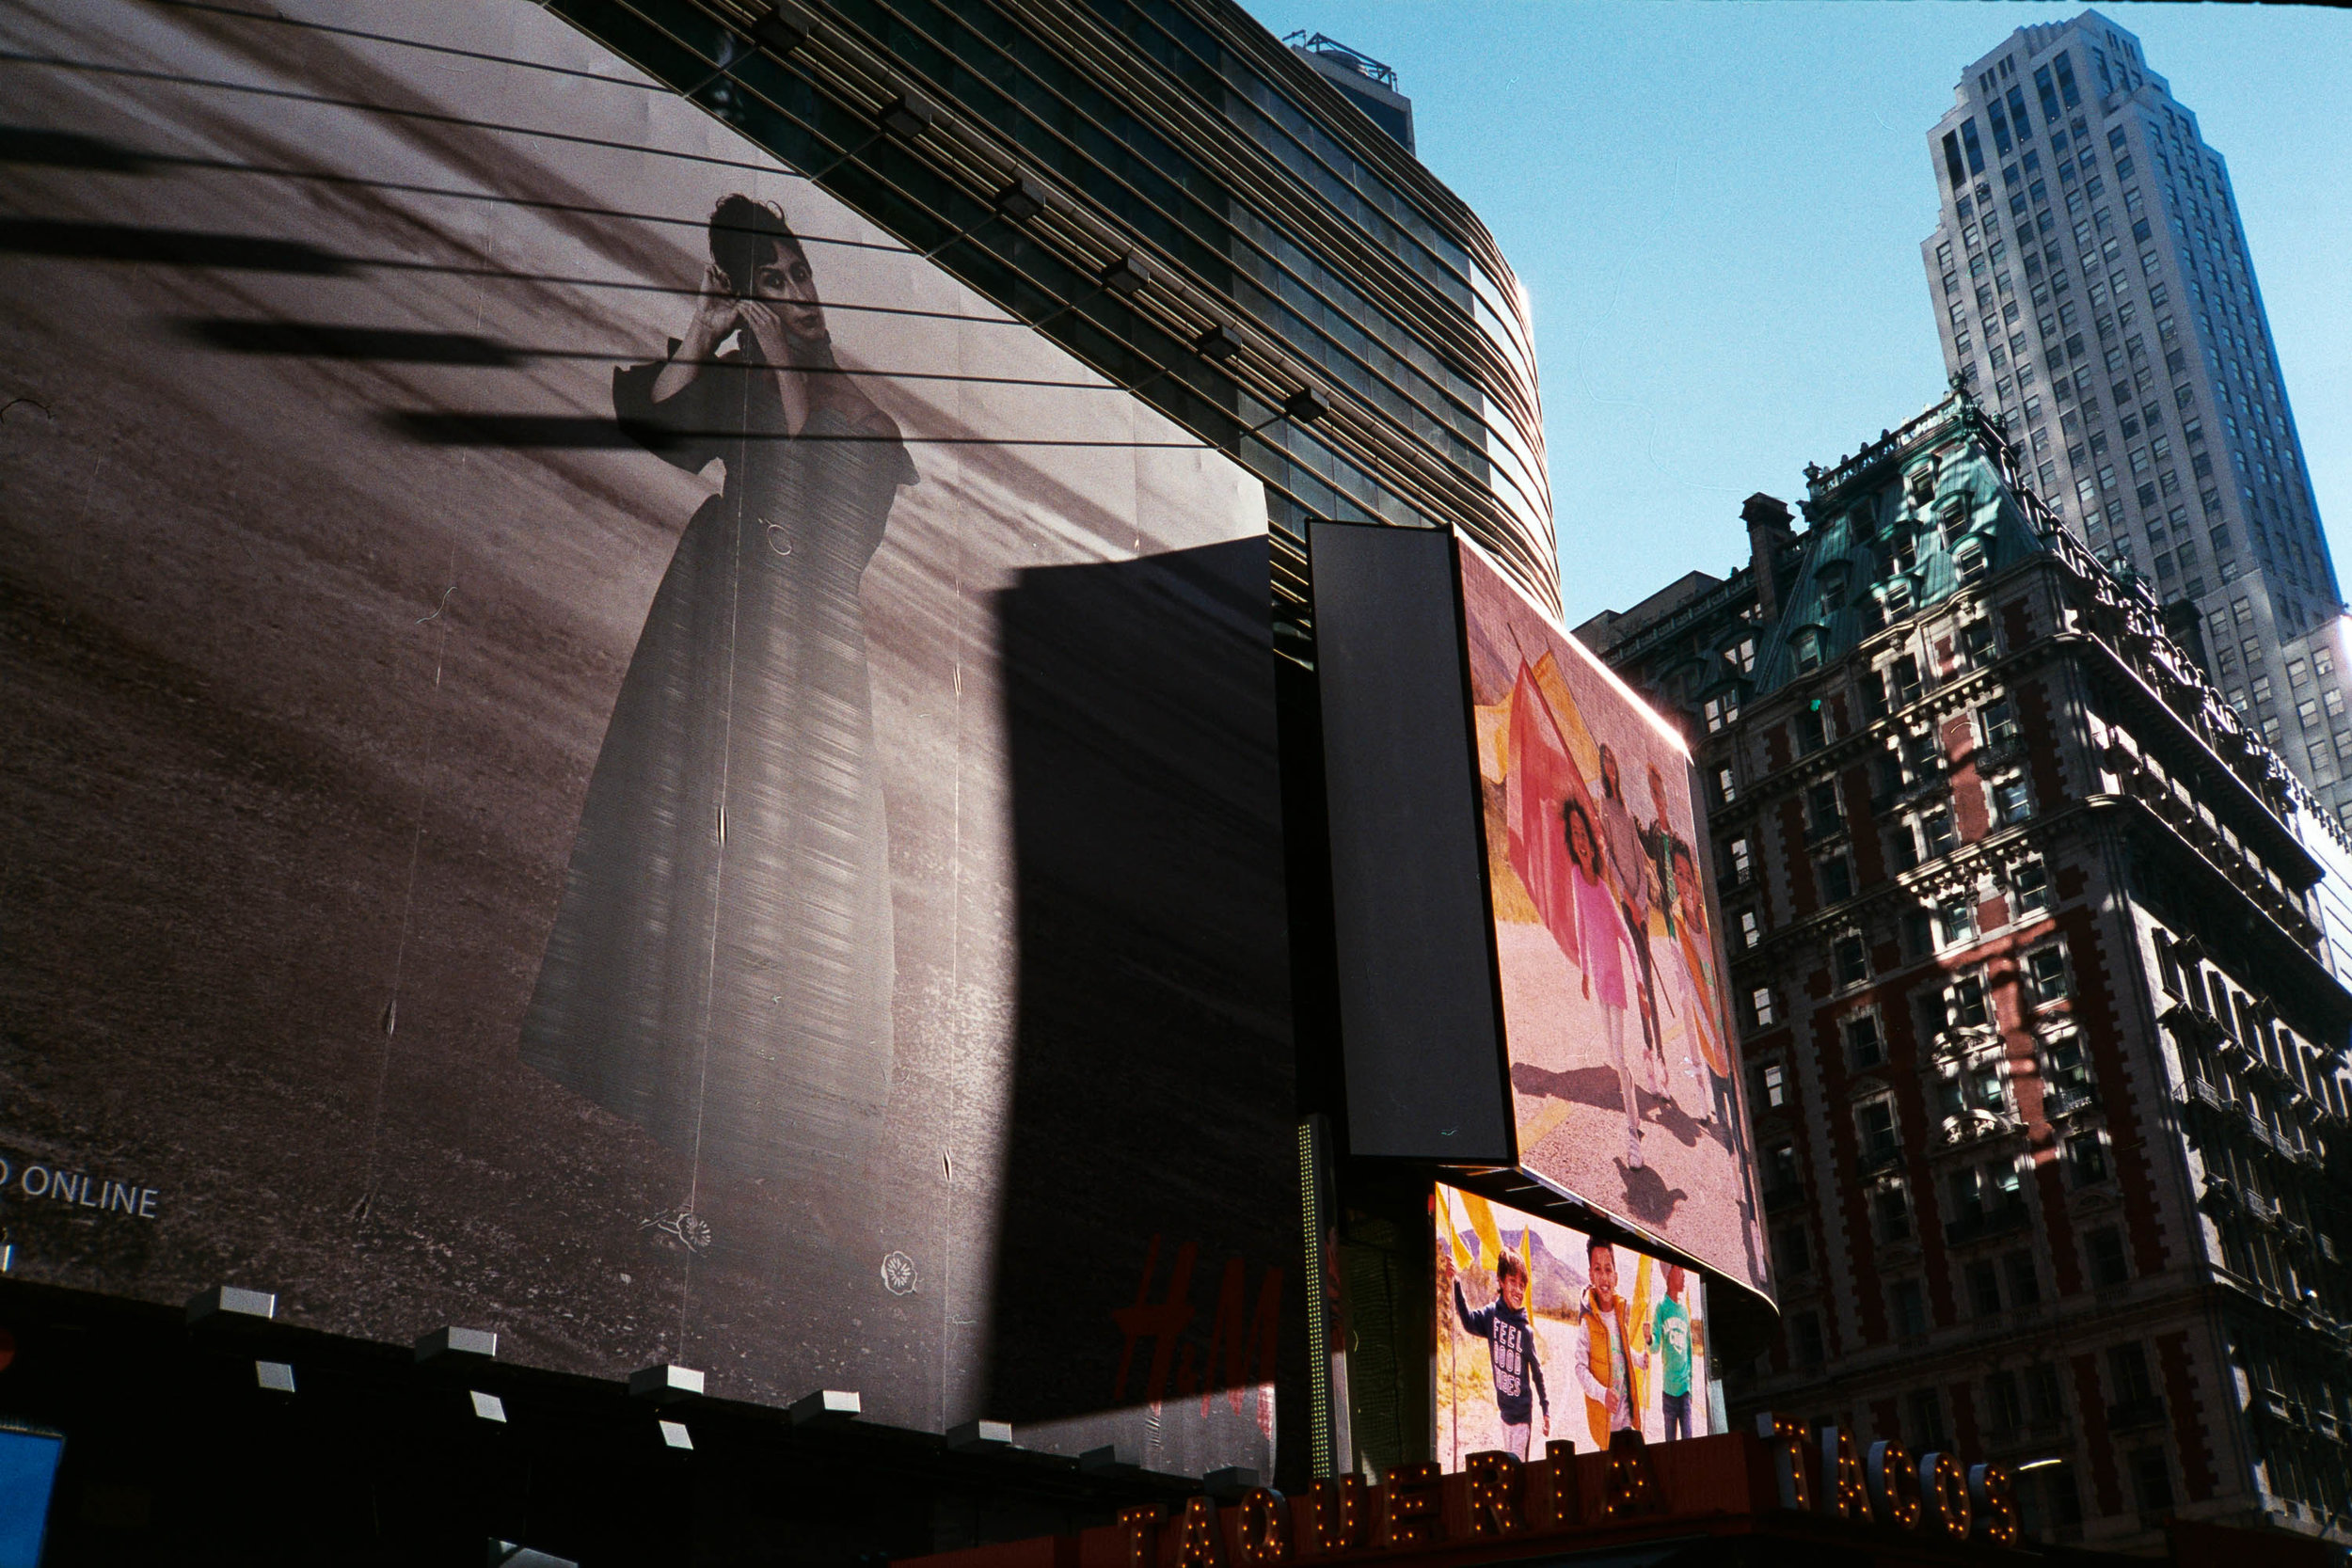 Shadows in Times Square